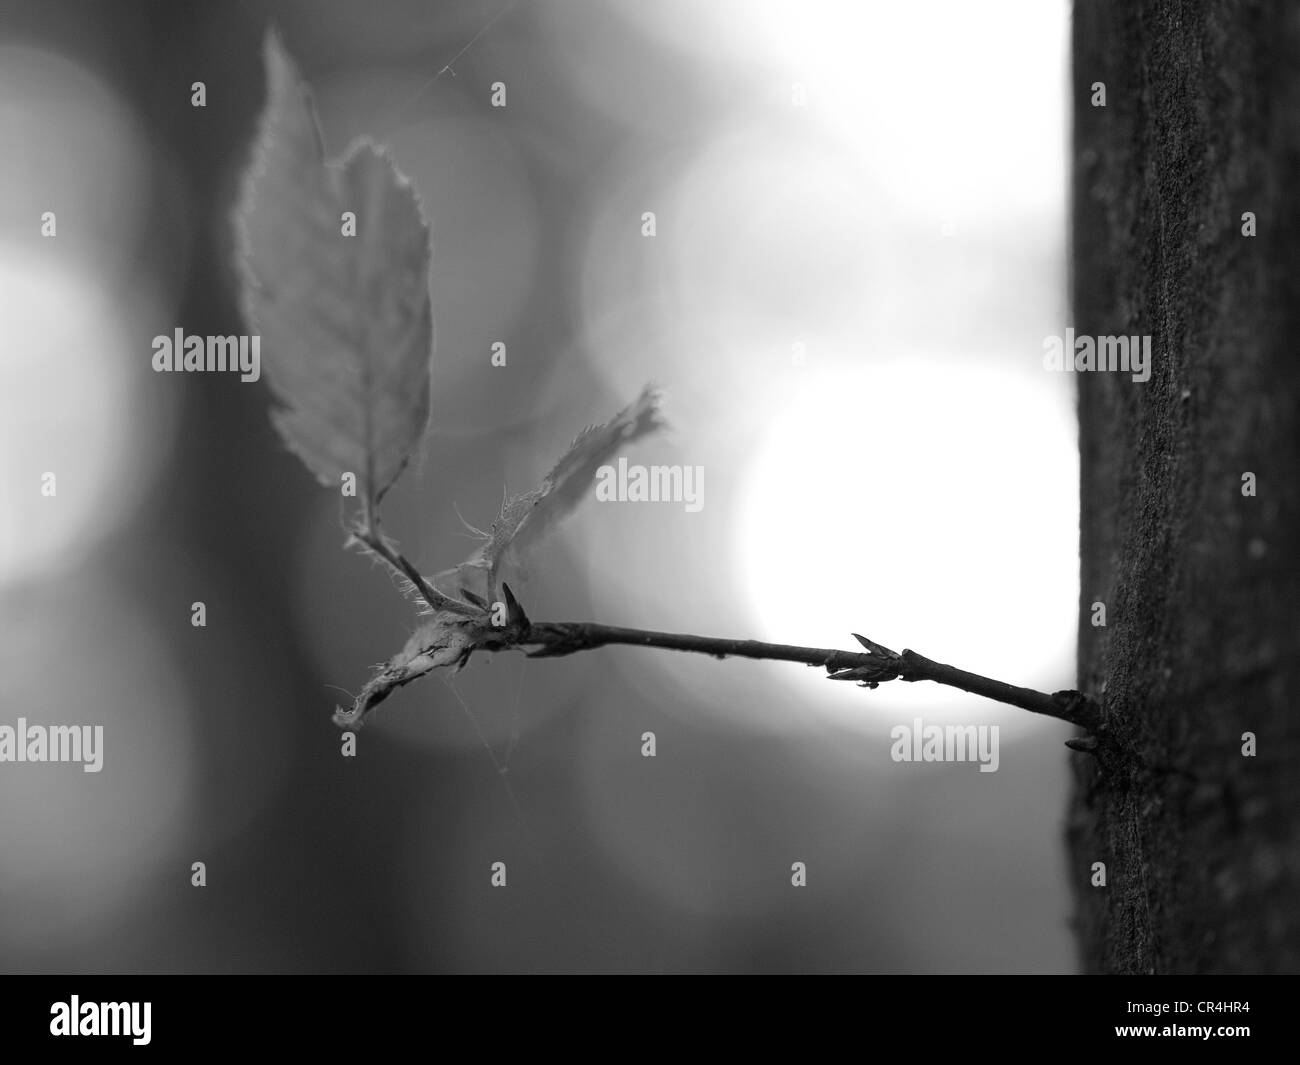 A small branch with young leaves on a trunk - black and white photography Stock Photo